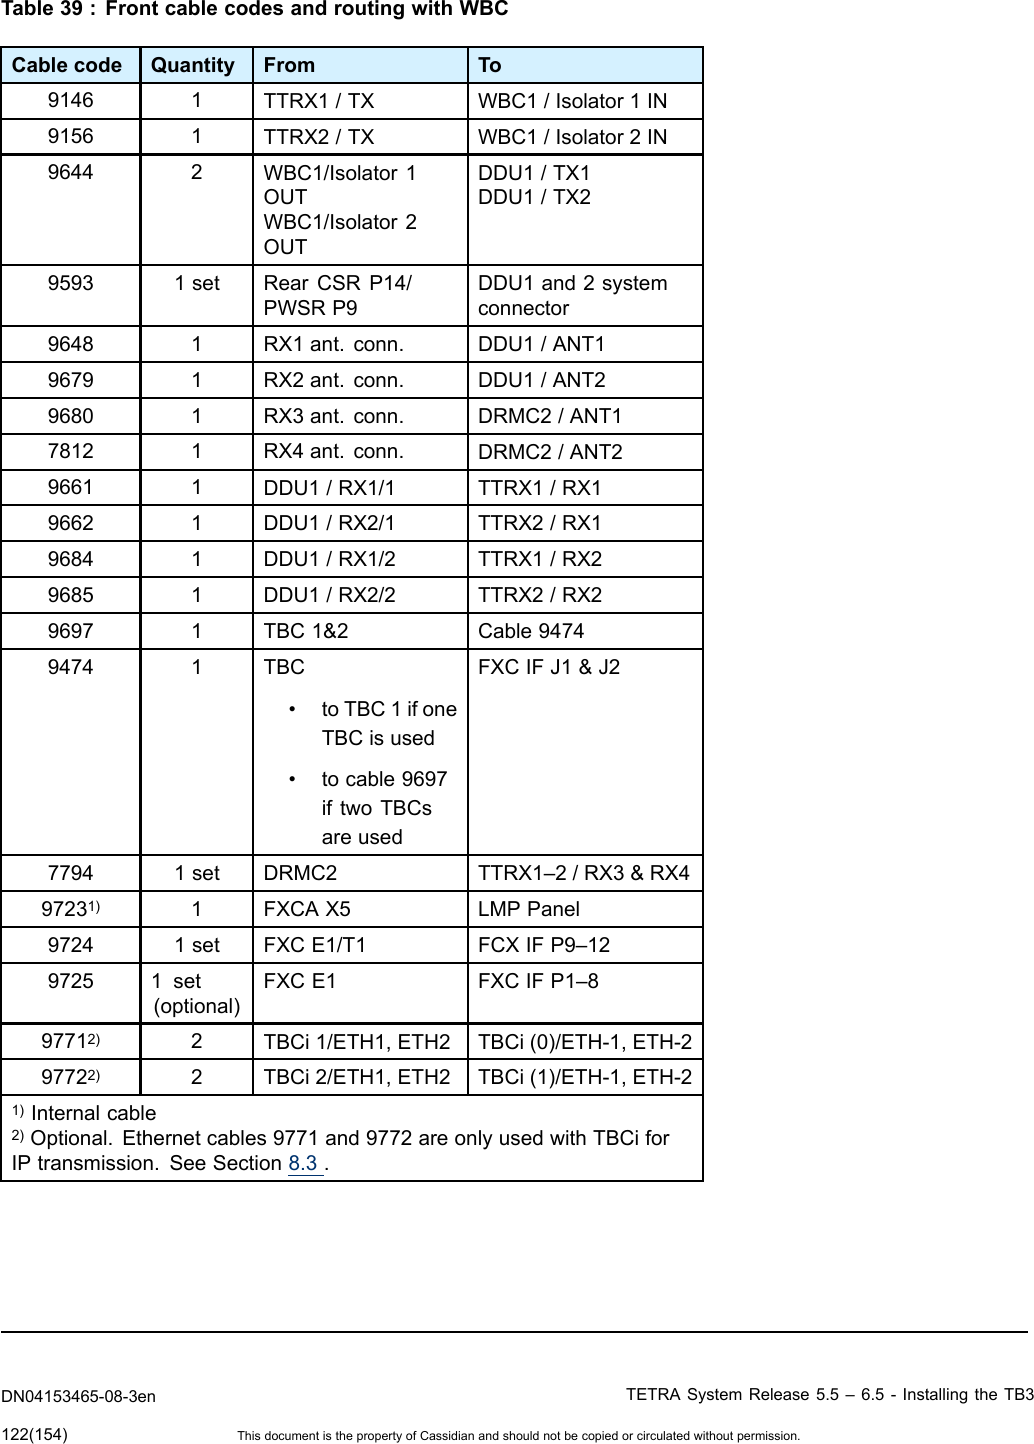 Table39:FrontcablecodesandroutingwithWBCCablecodeQuantityFromTo91461TTRX1/TXWBC1/Isolator1IN91561TTRX2/TXWBC1/Isolator2IN96442WBC1/Isolator1OUTWBC1/Isolator2OUTDDU1/TX1DDU1/TX295931setRearCSRP14/PWSRP9DDU1and2systemconnector96481RX1ant.conn.DDU1/ANT196791RX2ant.conn.DDU1/ANT296801RX3ant.conn.DRMC2/ANT178121RX4ant.conn.DRMC2/ANT296611DDU1/RX1/1TTRX1/RX196621DDU1/RX2/1TTRX2/RX196841DDU1/RX1/2TTRX1/RX296851DDU1/RX2/2TTRX2/RX296971TBC1&amp;2Cable947494741TBC•toTBC1ifoneTBCisused•tocable9697iftwoTBCsareusedFXCIFJ1&amp;J277941setDRMC2TTRX1–2/RX3&amp;RX497231)1FXCAX5LMPPanel97241setFXCE1/T1FCXIFP9–1297251set(optional)FXCE1FXCIFP1–897712)2TBCi1/ETH1,ETH2TBCi(0)/ETH-1,ETH-297722)2TBCi2/ETH1,ETH2TBCi(1)/ETH-1,ETH-21)Internalcable2)Optional.Ethernetcables9771and9772areonlyusedwithTBCiforIPtransmission.SeeSection8.3.DN04153465-08-3enTETRASystemRelease5.5–6.5-InstallingtheTB3122(154)ThisdocumentisthepropertyofCassidianandshouldnotbecopiedorcirculatedwithoutpermission.